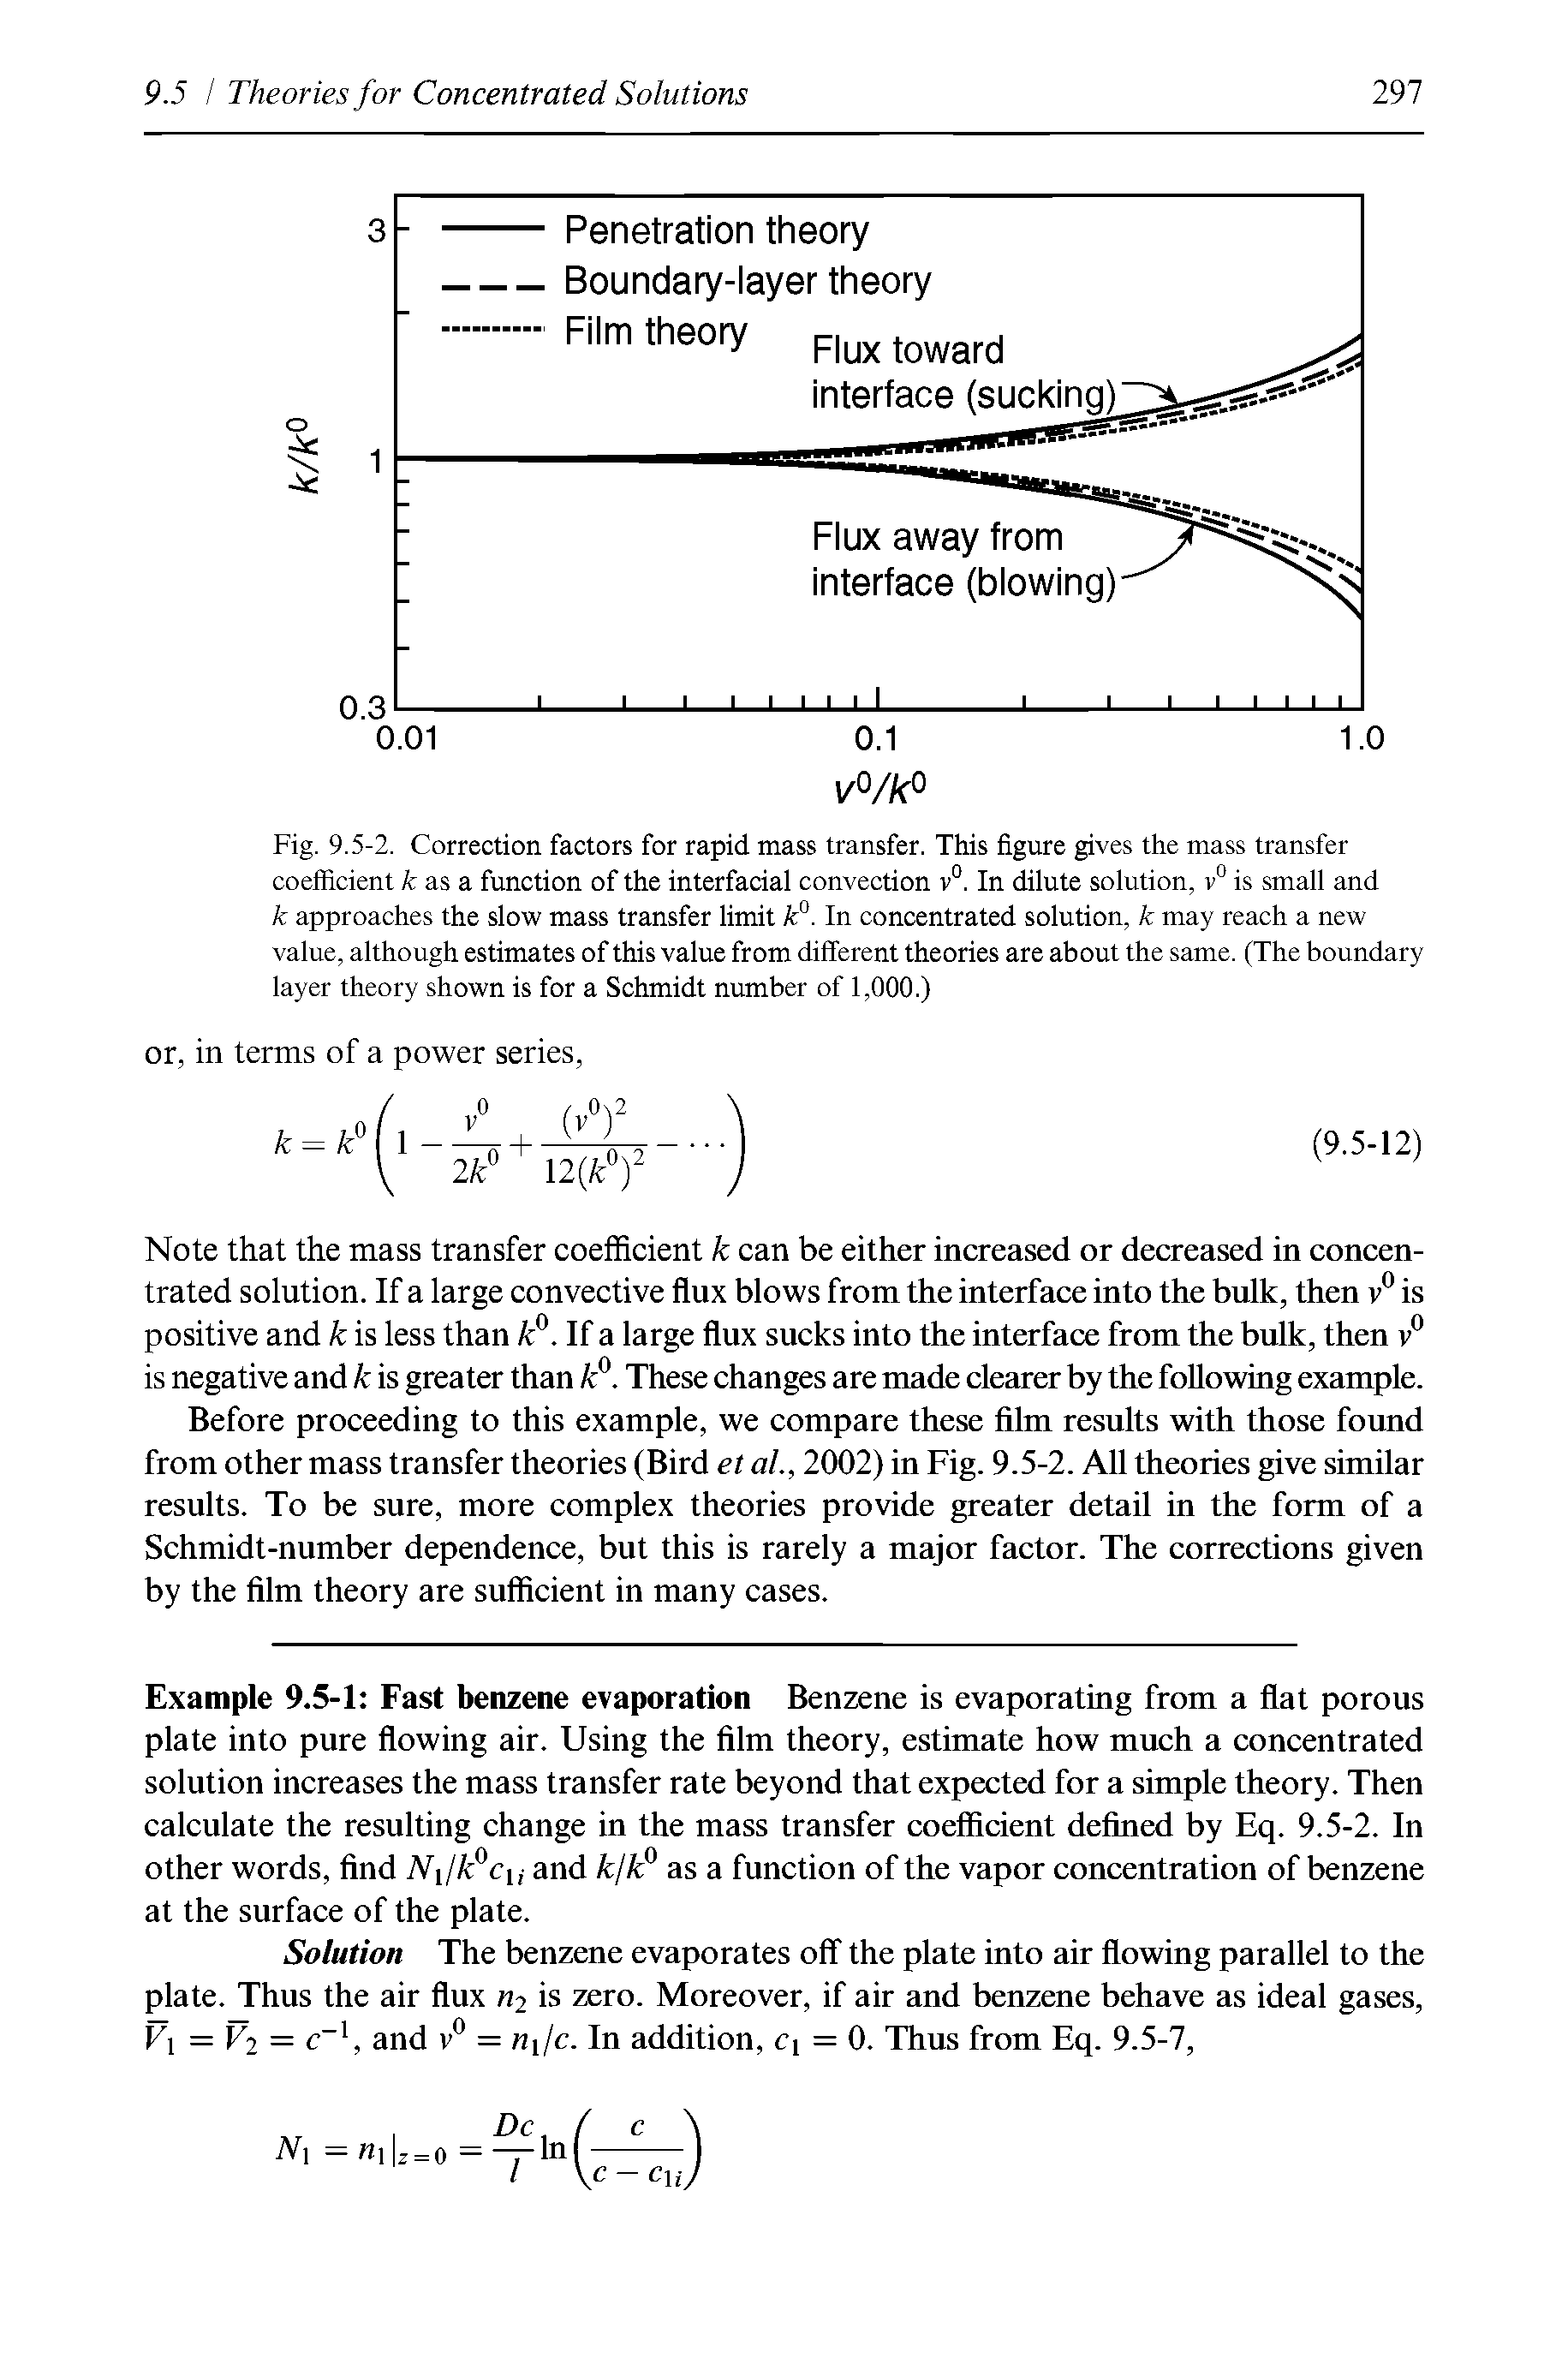 Fig. 9.5-2. Correction factors for rapid mass transfer. This figure gives the mass transfer coefficient A as a function of the interfacial convection v . In dilute solution, is small and k approaches the slow mass transfer limit k°. In concentrated solution, k may reach a new value, although estimates of this value from different theories are about the same. (The boundary layer theory shown is for a Schmidt number of 1,000.)...